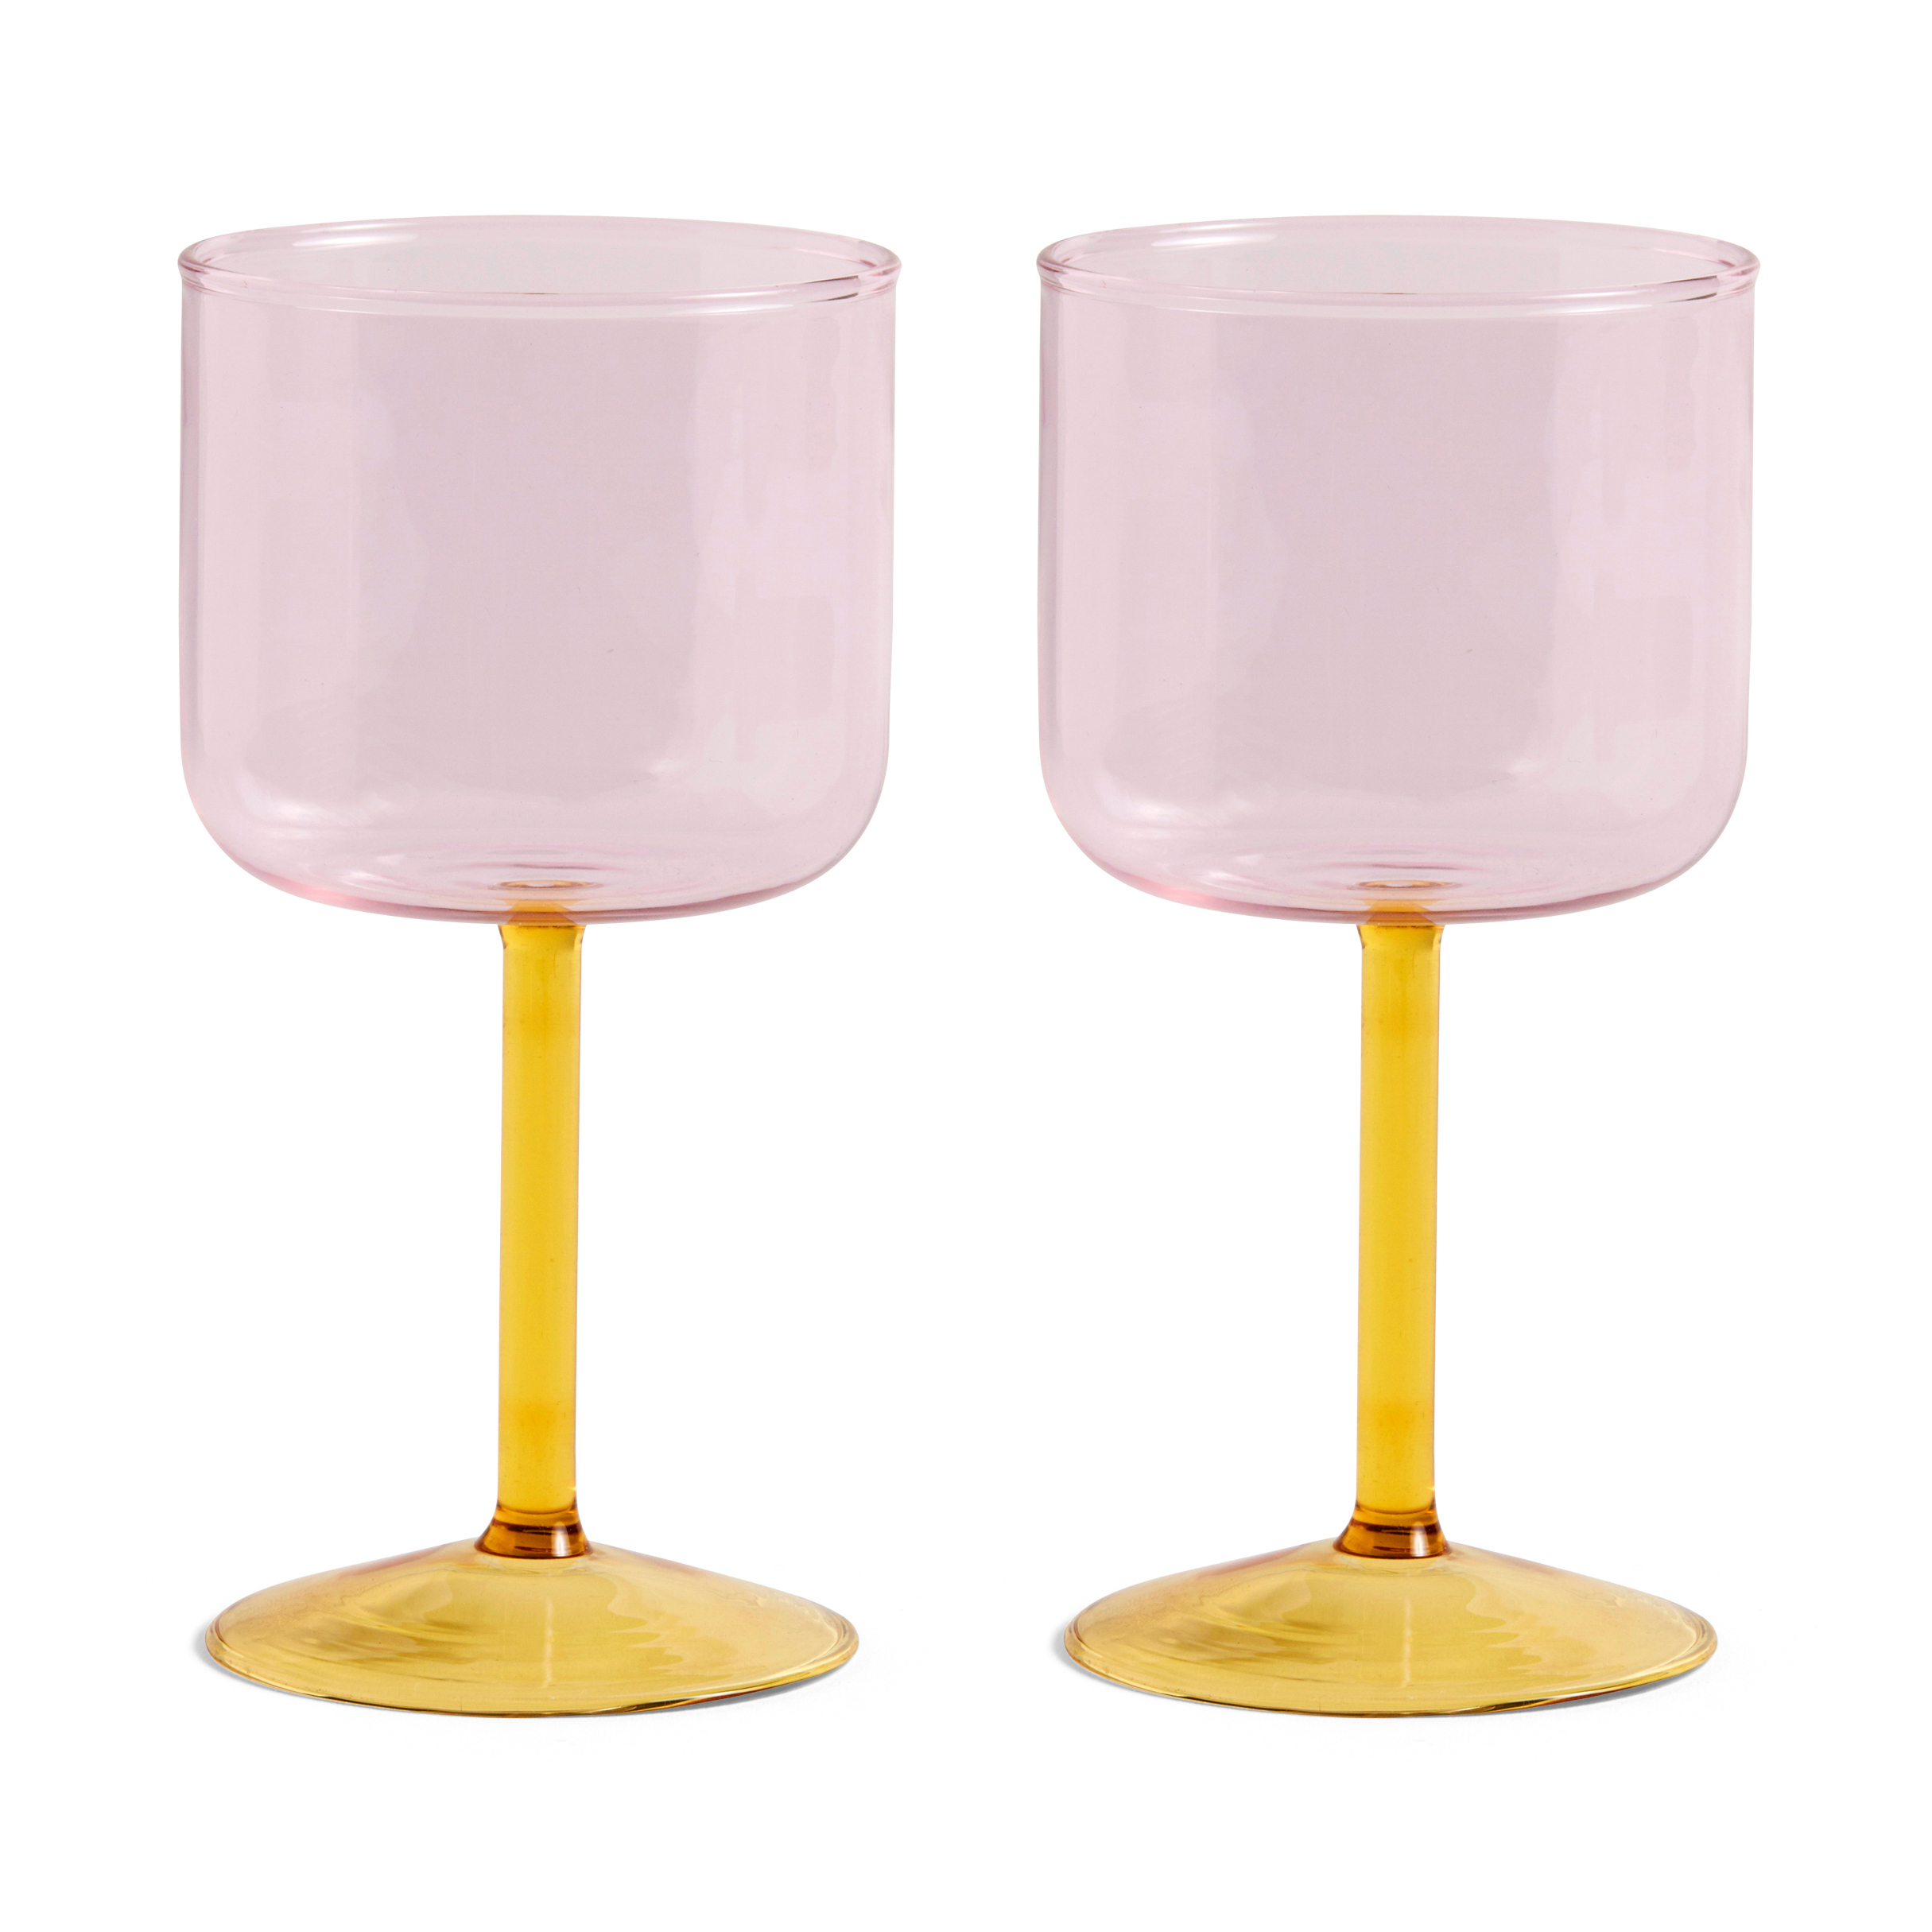 Time to get the fancy glassware out - Katie Alice pink ombre wine glasses